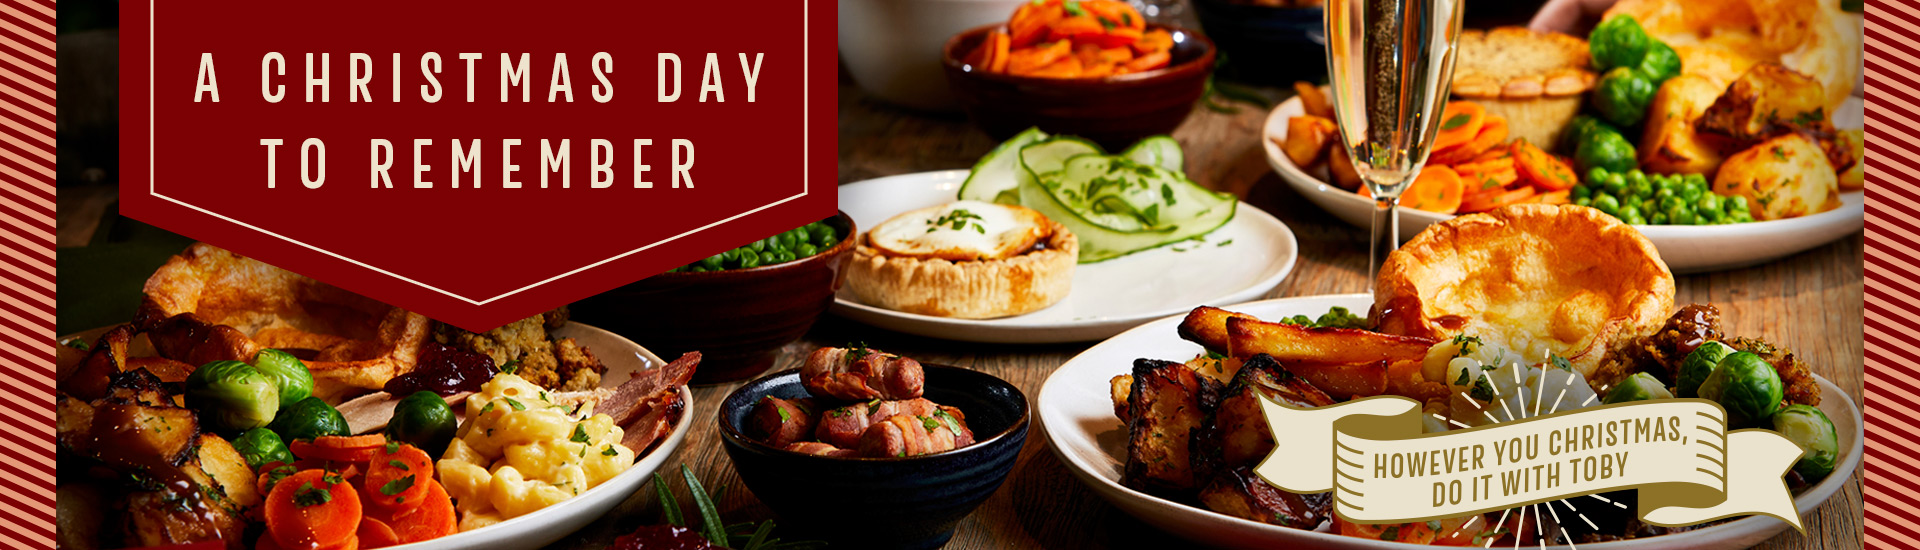 Christmas Day menu at Toby Carvery Ainsworth